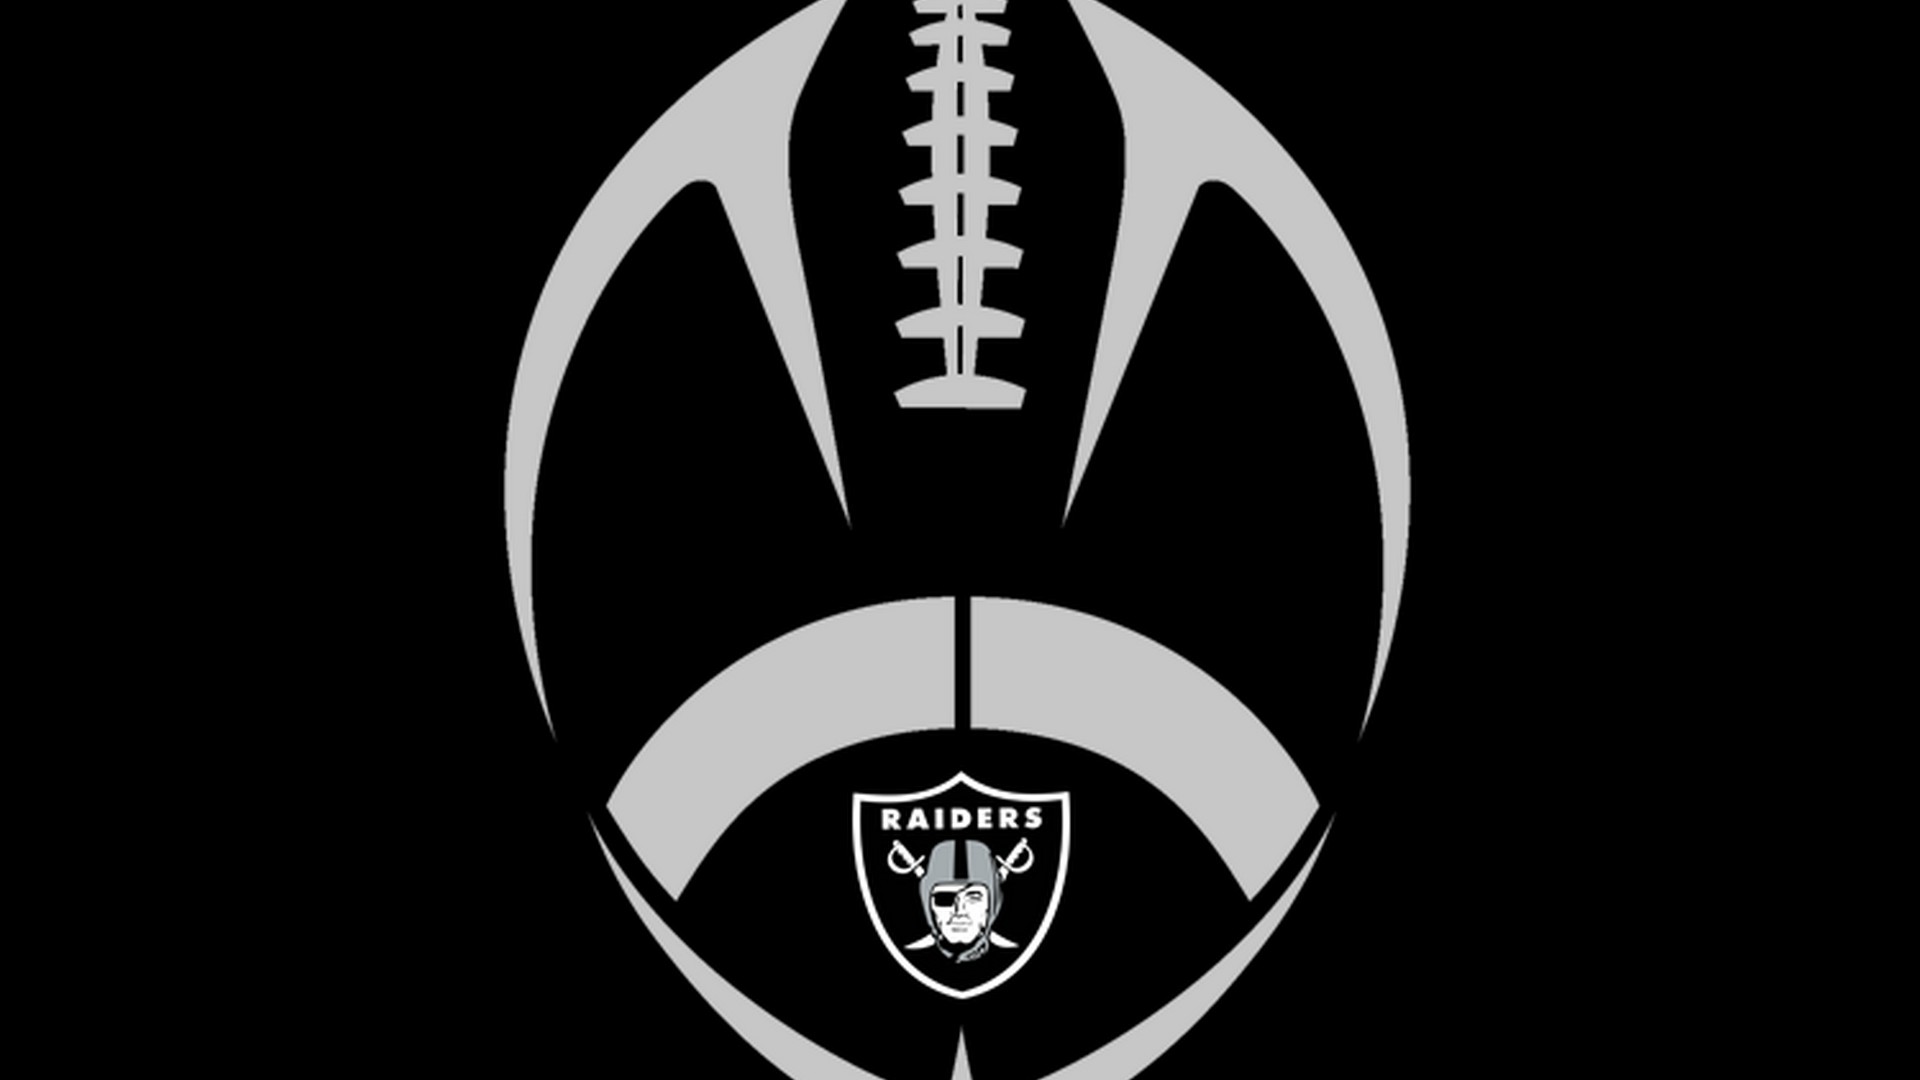 Wallpapers HD Oakland Raiders NFL With high-resolution 1920X1080 pixel. You can use this wallpaper for your Mac or Windows Desktop Background, iPhone, Android or Tablet and another Smartphone device